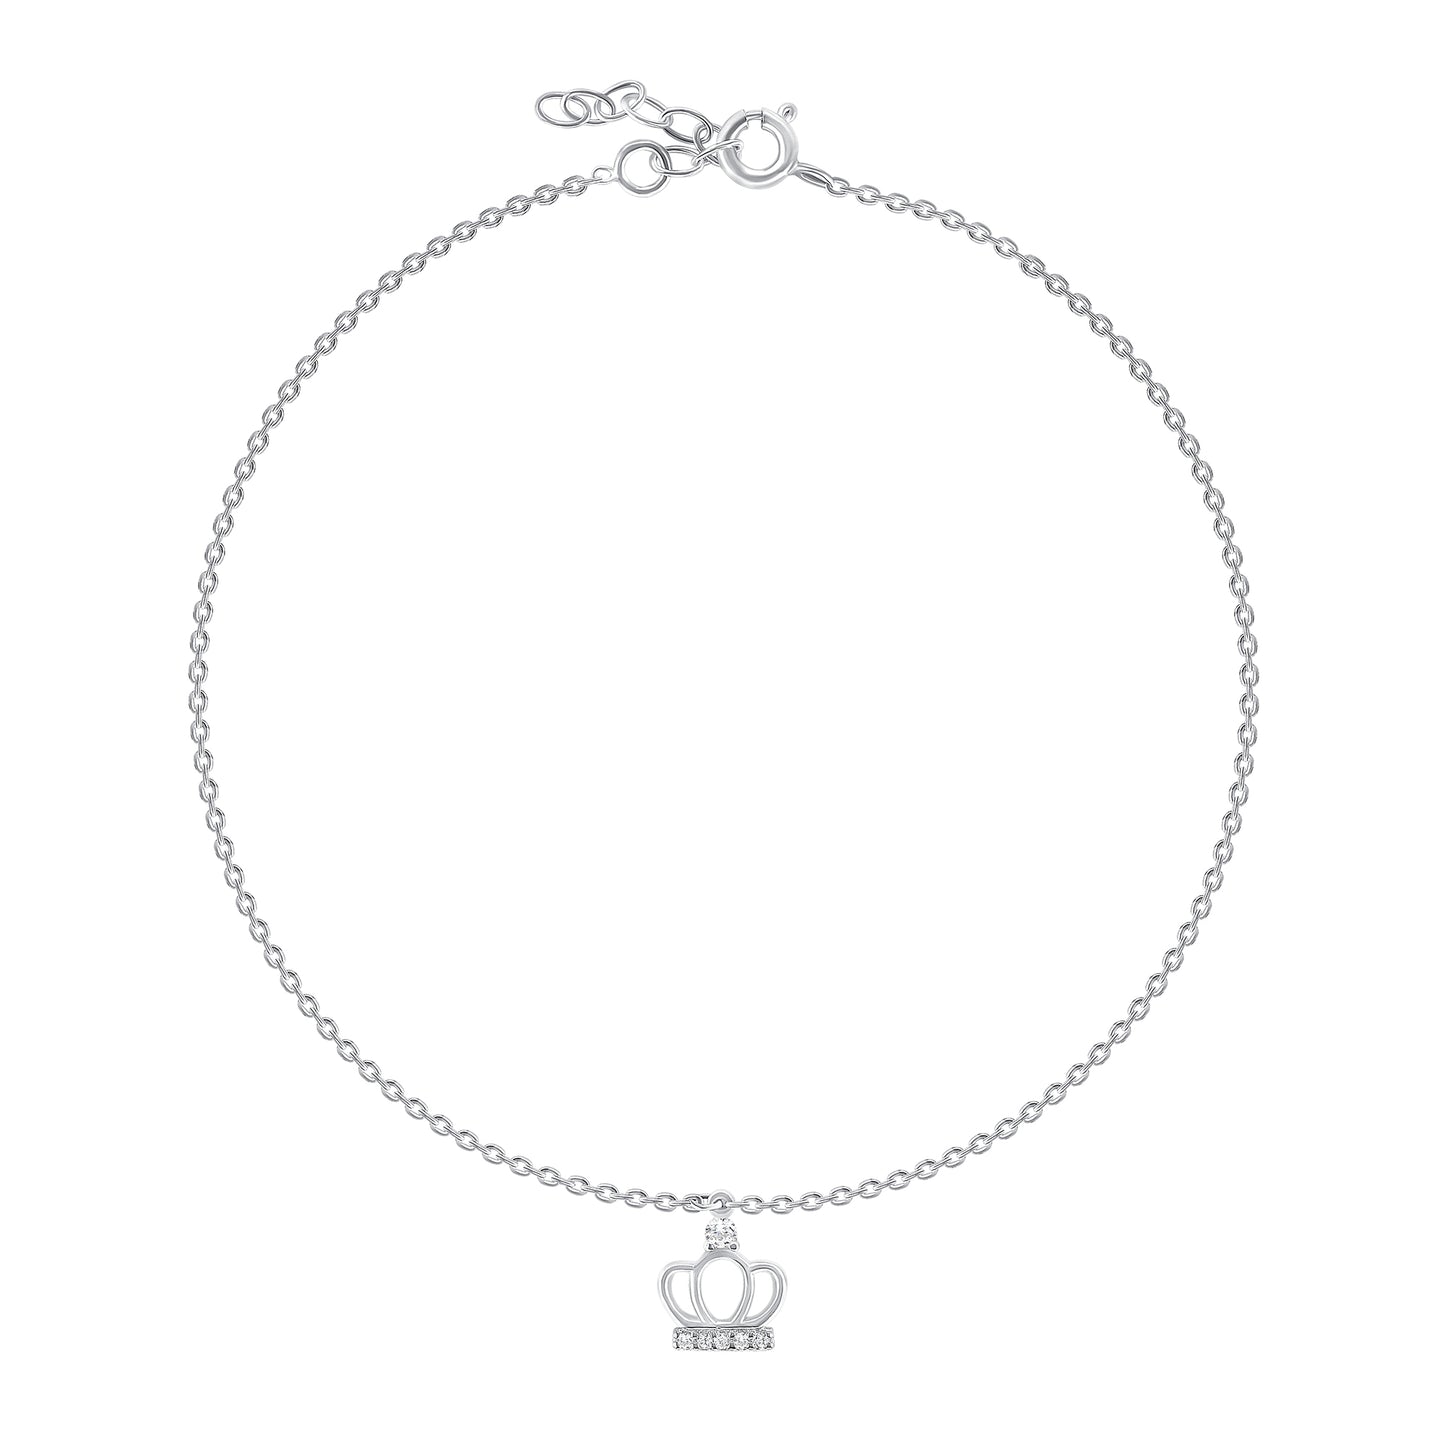 Silver 925 Cubic Zirconia Crown Charm Anklet. BF0173